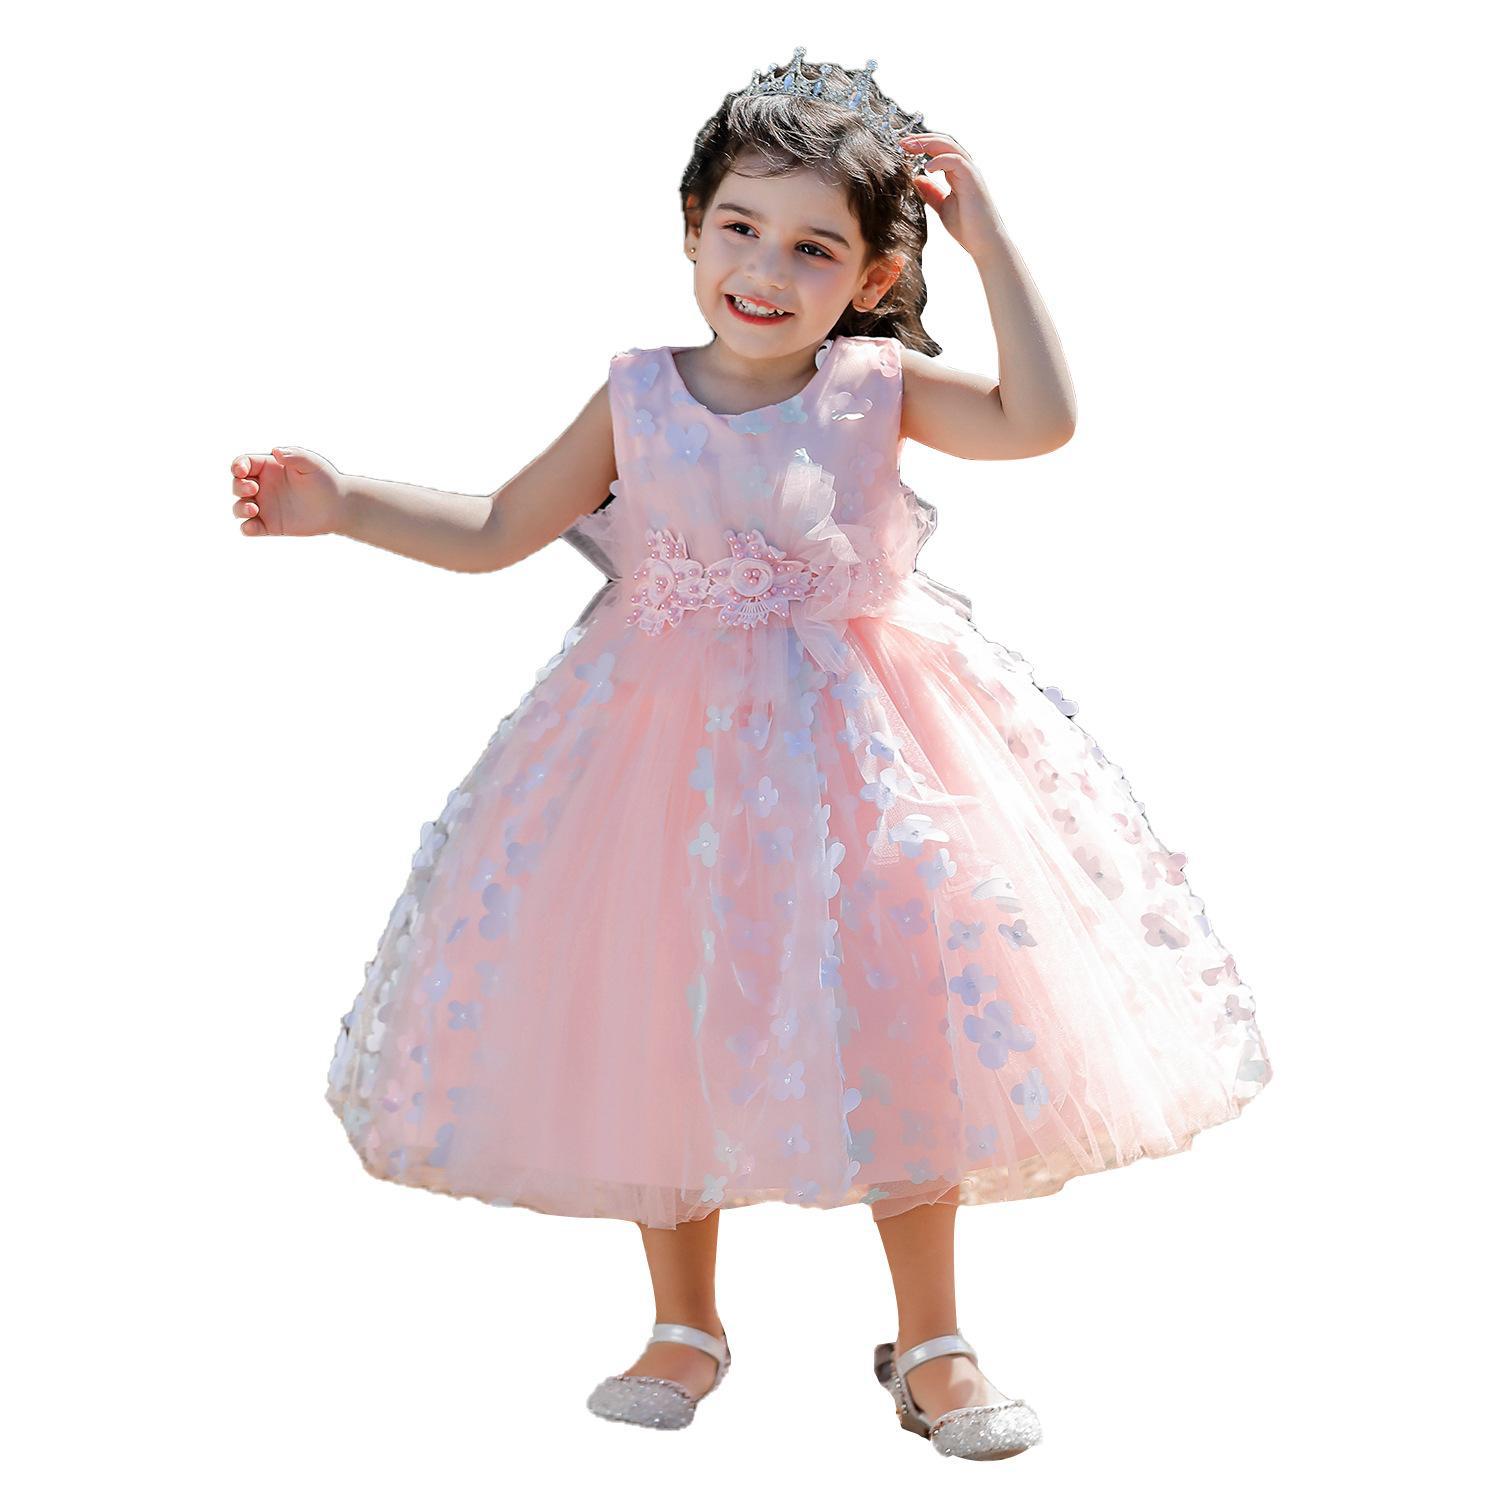 Baby Dress Clothing CO.Ltd Flower Girl Baby Wedding Dress Fairy Petals Children's Clothing Girl Party Dress Kids Clothes Fancy Teenage Girl Gown 0 1 2 3 years